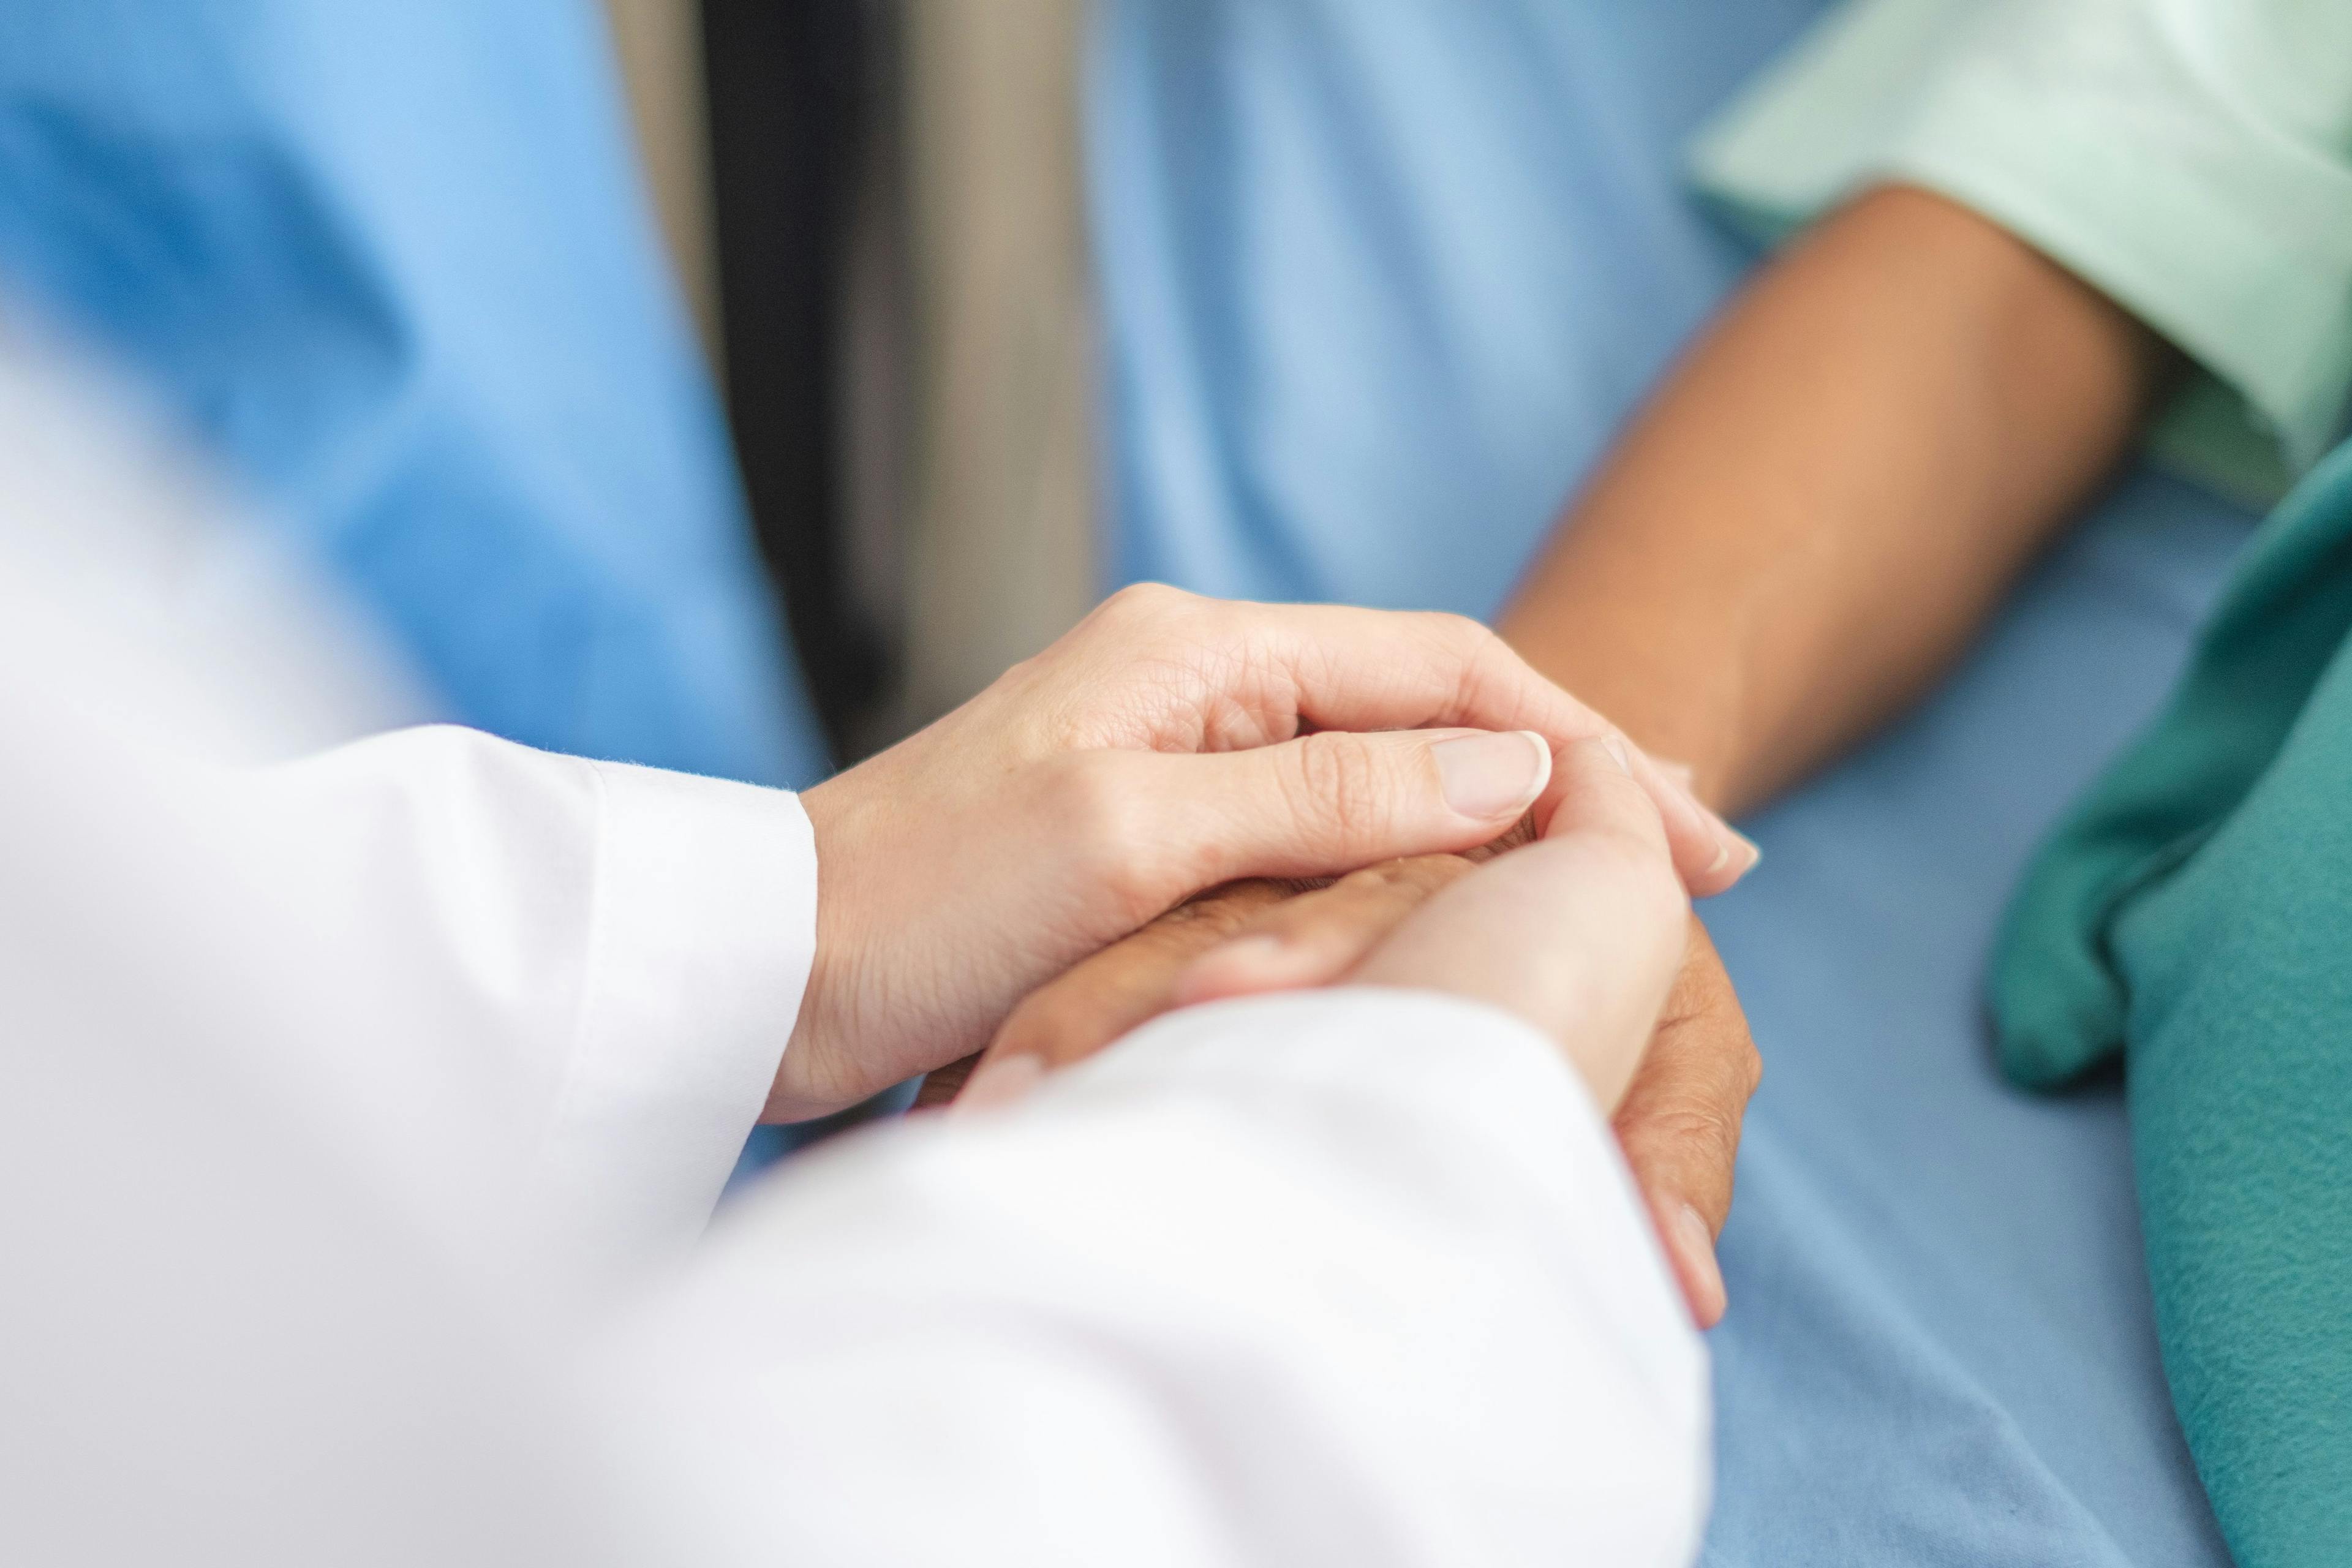 Expert: Recognizing the Importance of Early Palliative Care Referrals Is Essential to Patient Care